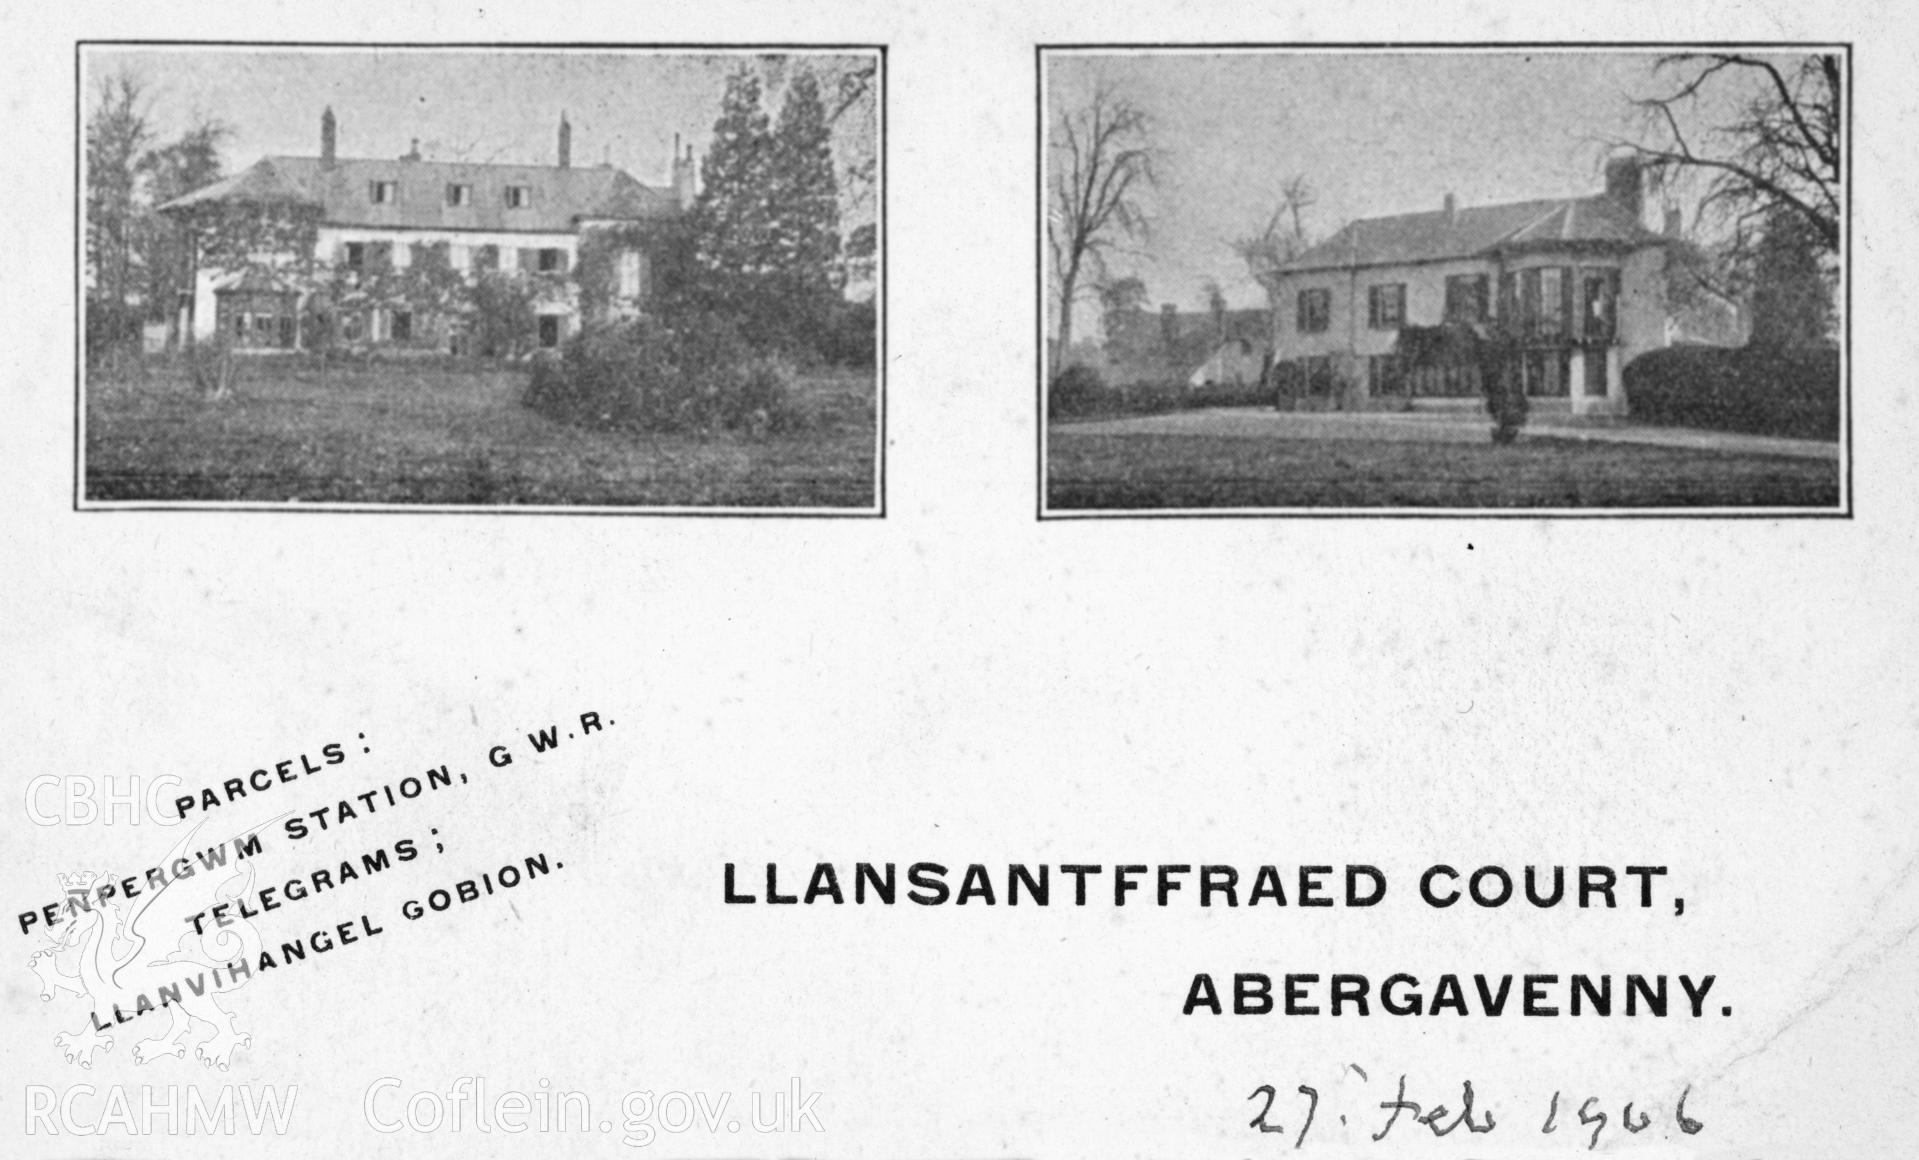 Digital copy of a letter head showing two views of Llansantffraed Court, Abergavenny.